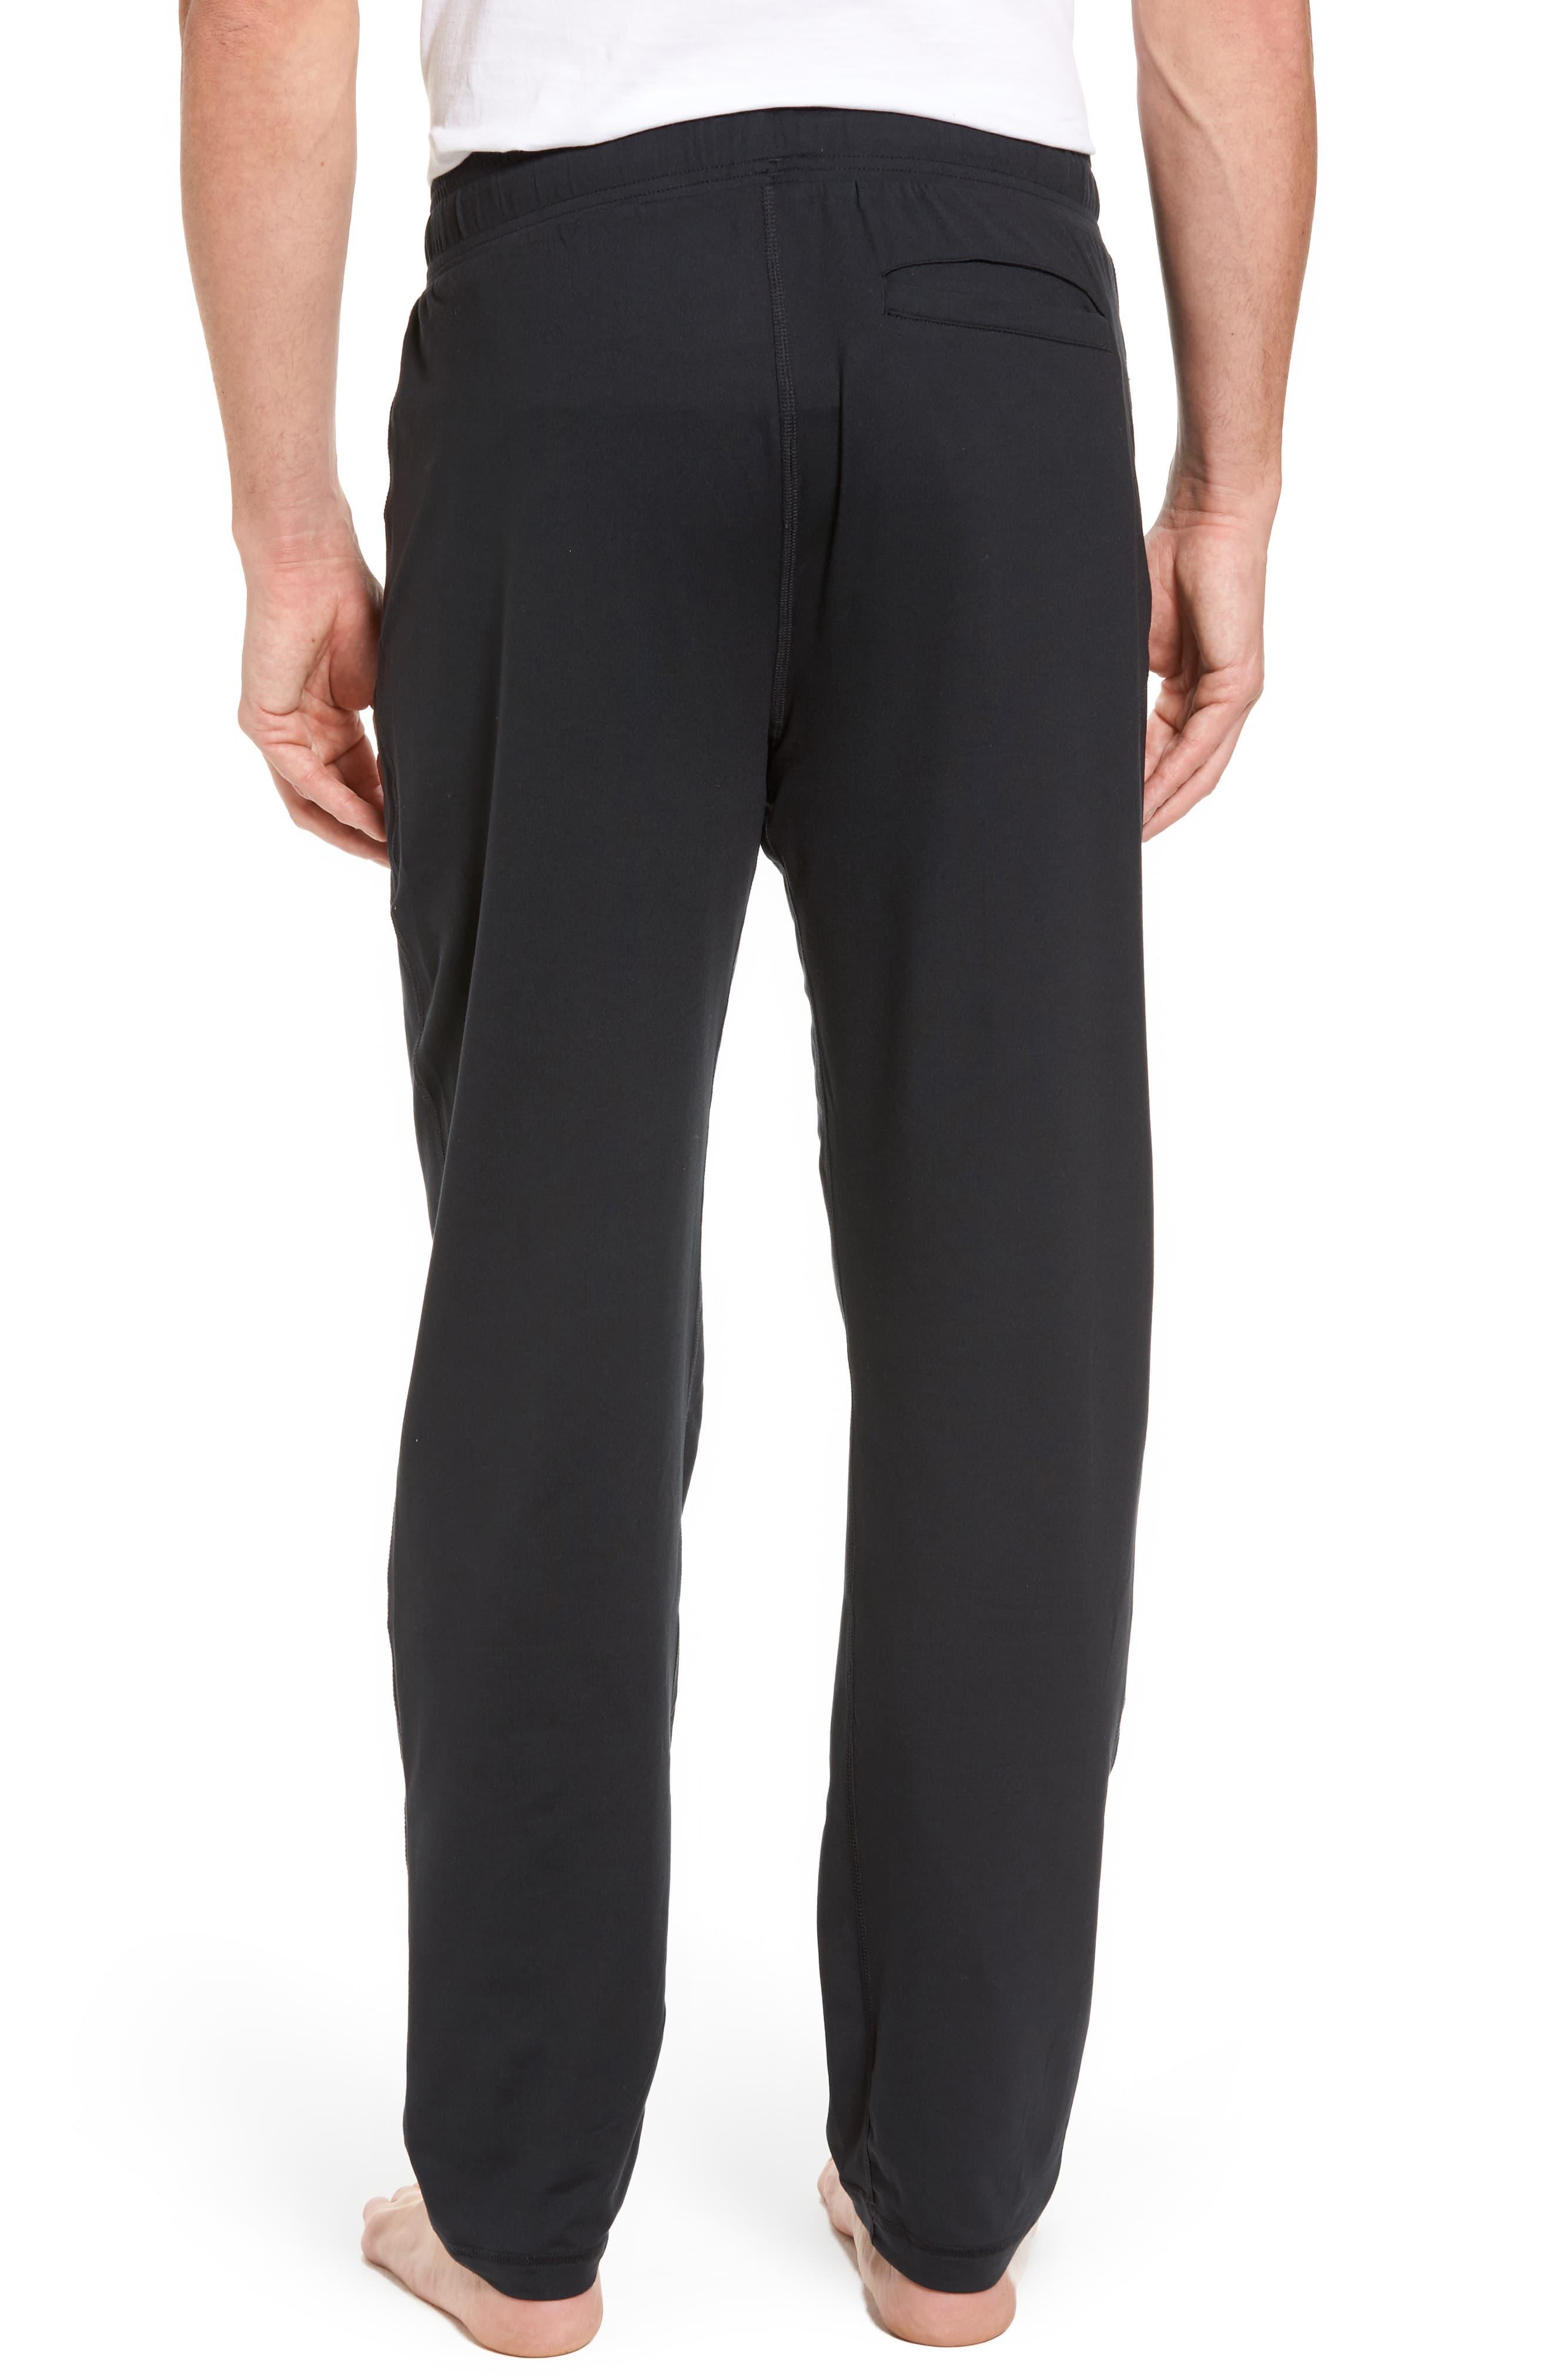 Alo Yoga Renew Relaxed Slim Fit Lounge Pants in Black for Men - Lyst